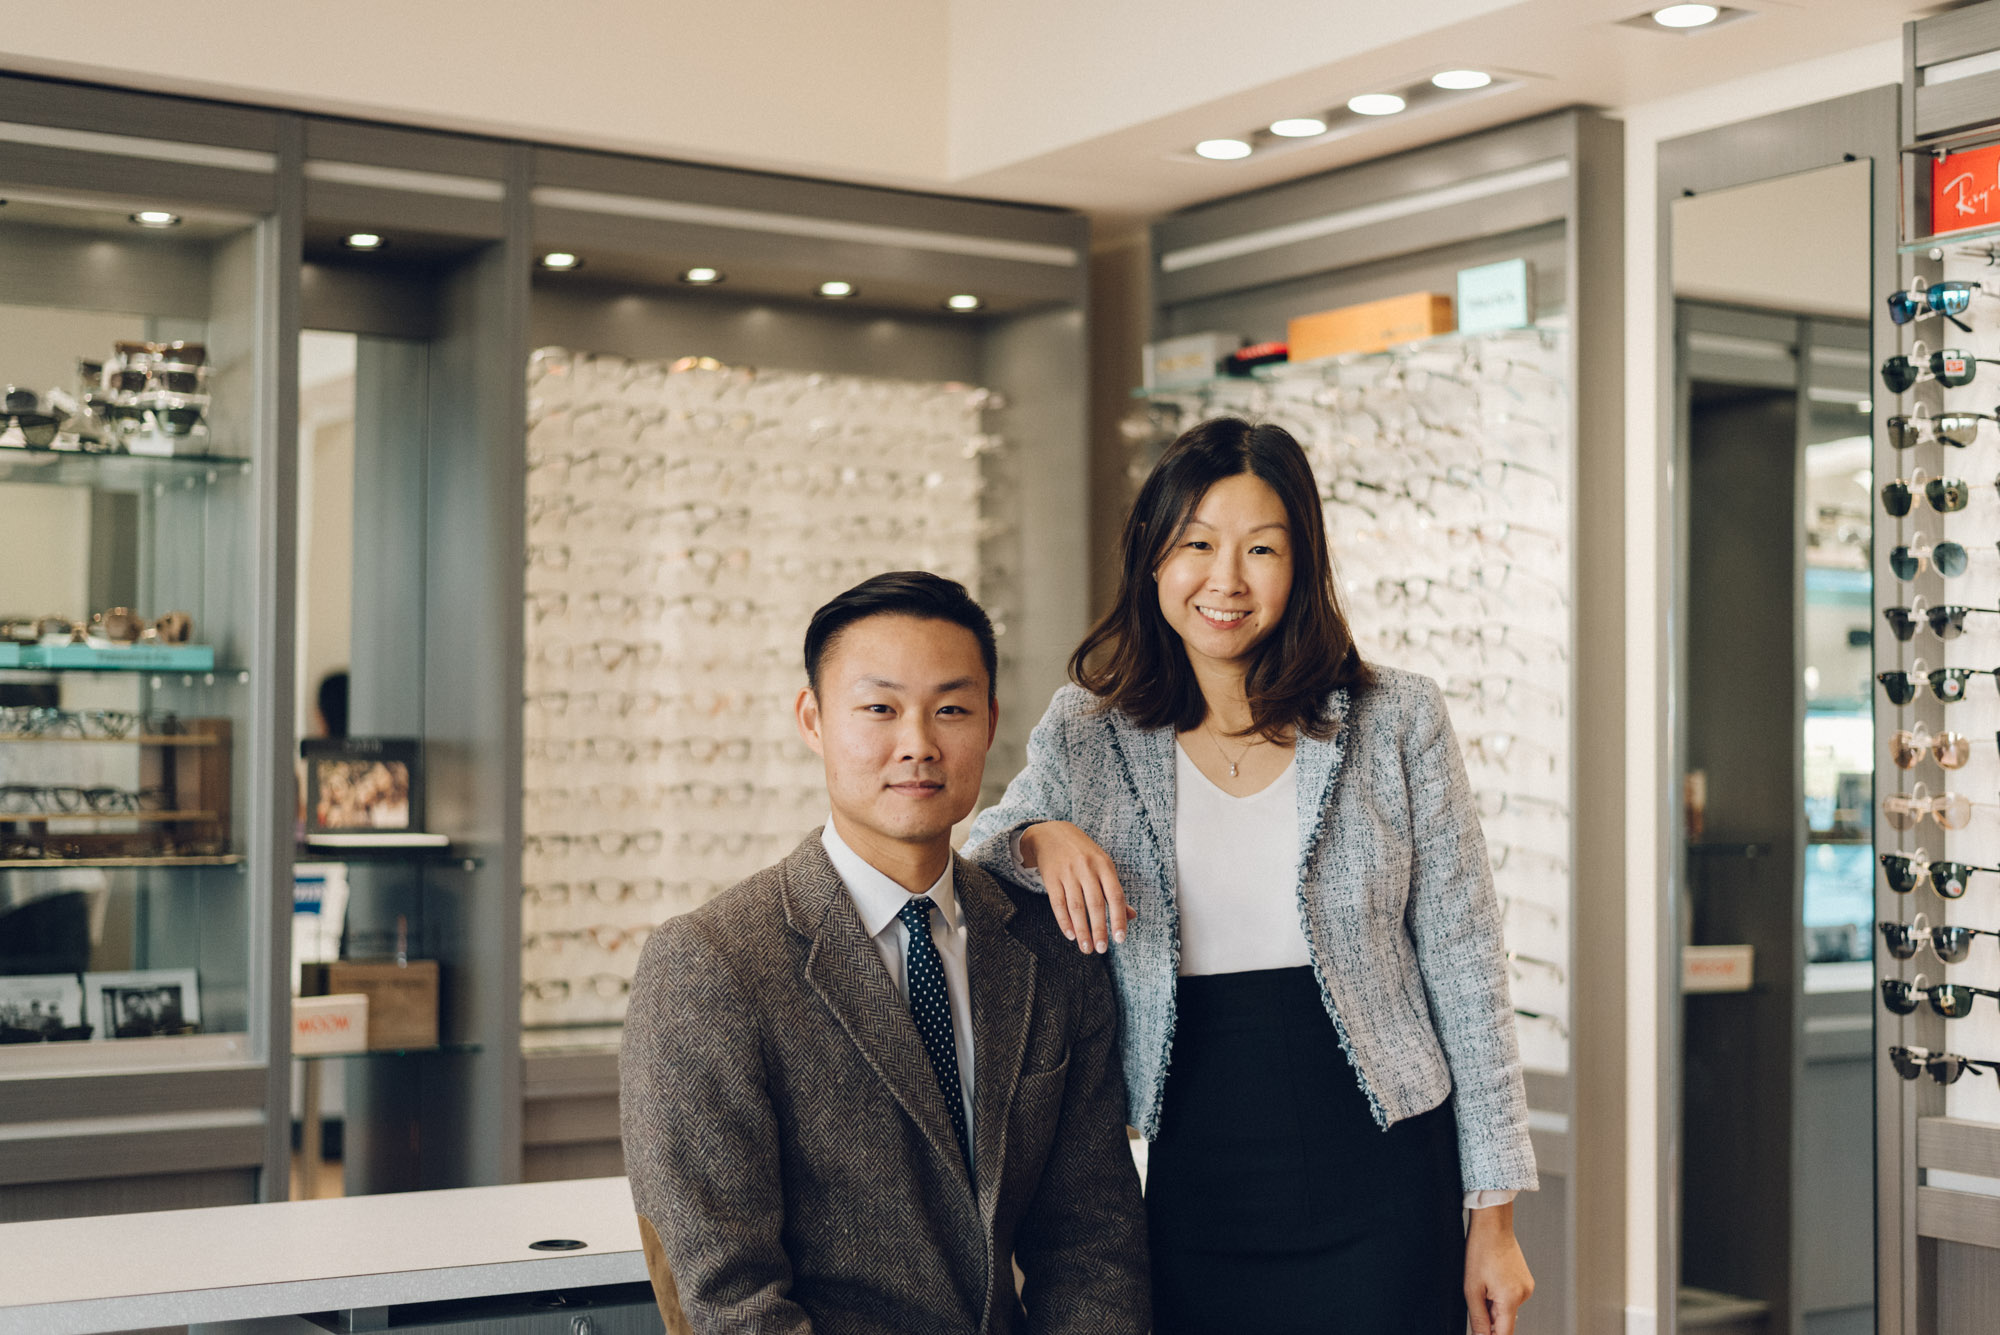 Dr. Soong and Dr. Hsu of Bright Vision Optometry